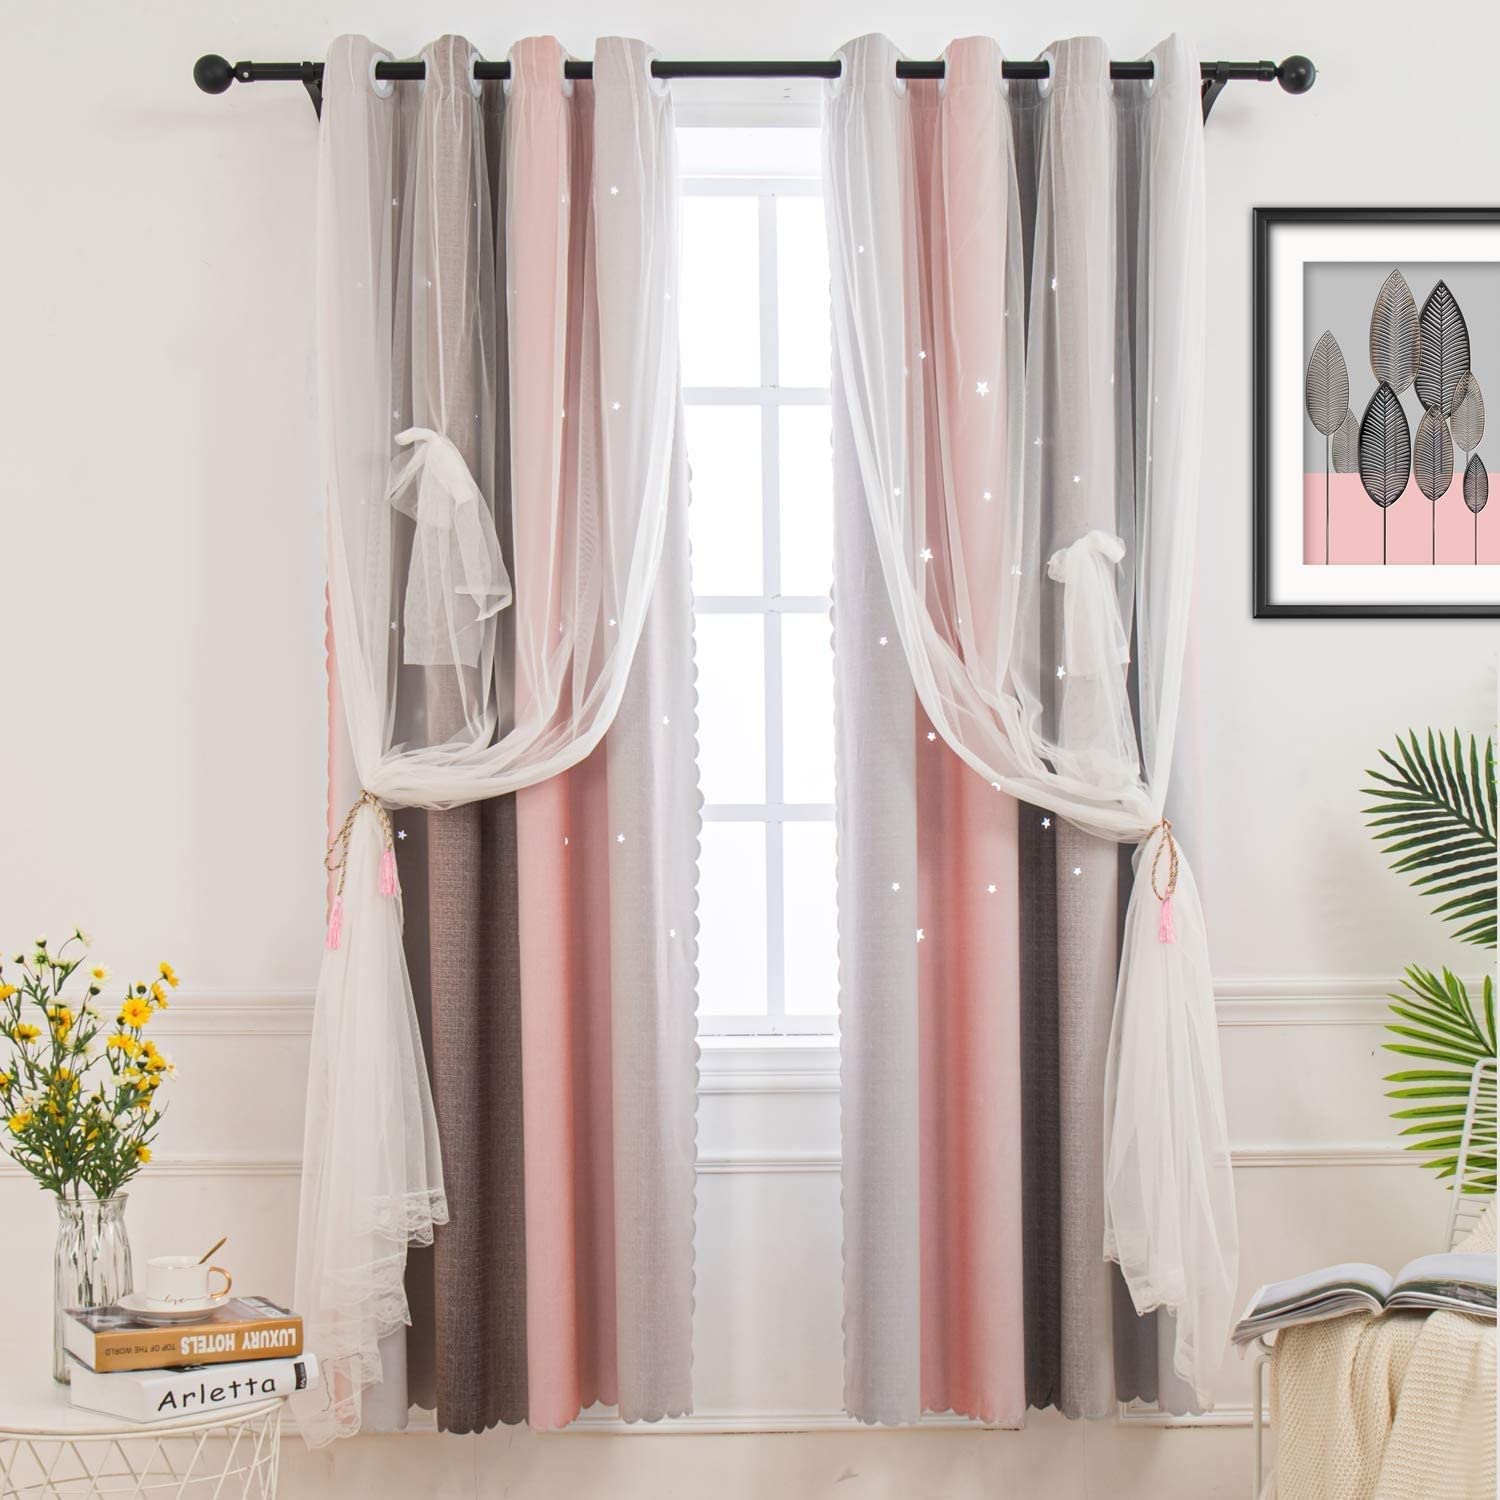 Hughapy Double Layer Star Blackout Bedroom Curtains